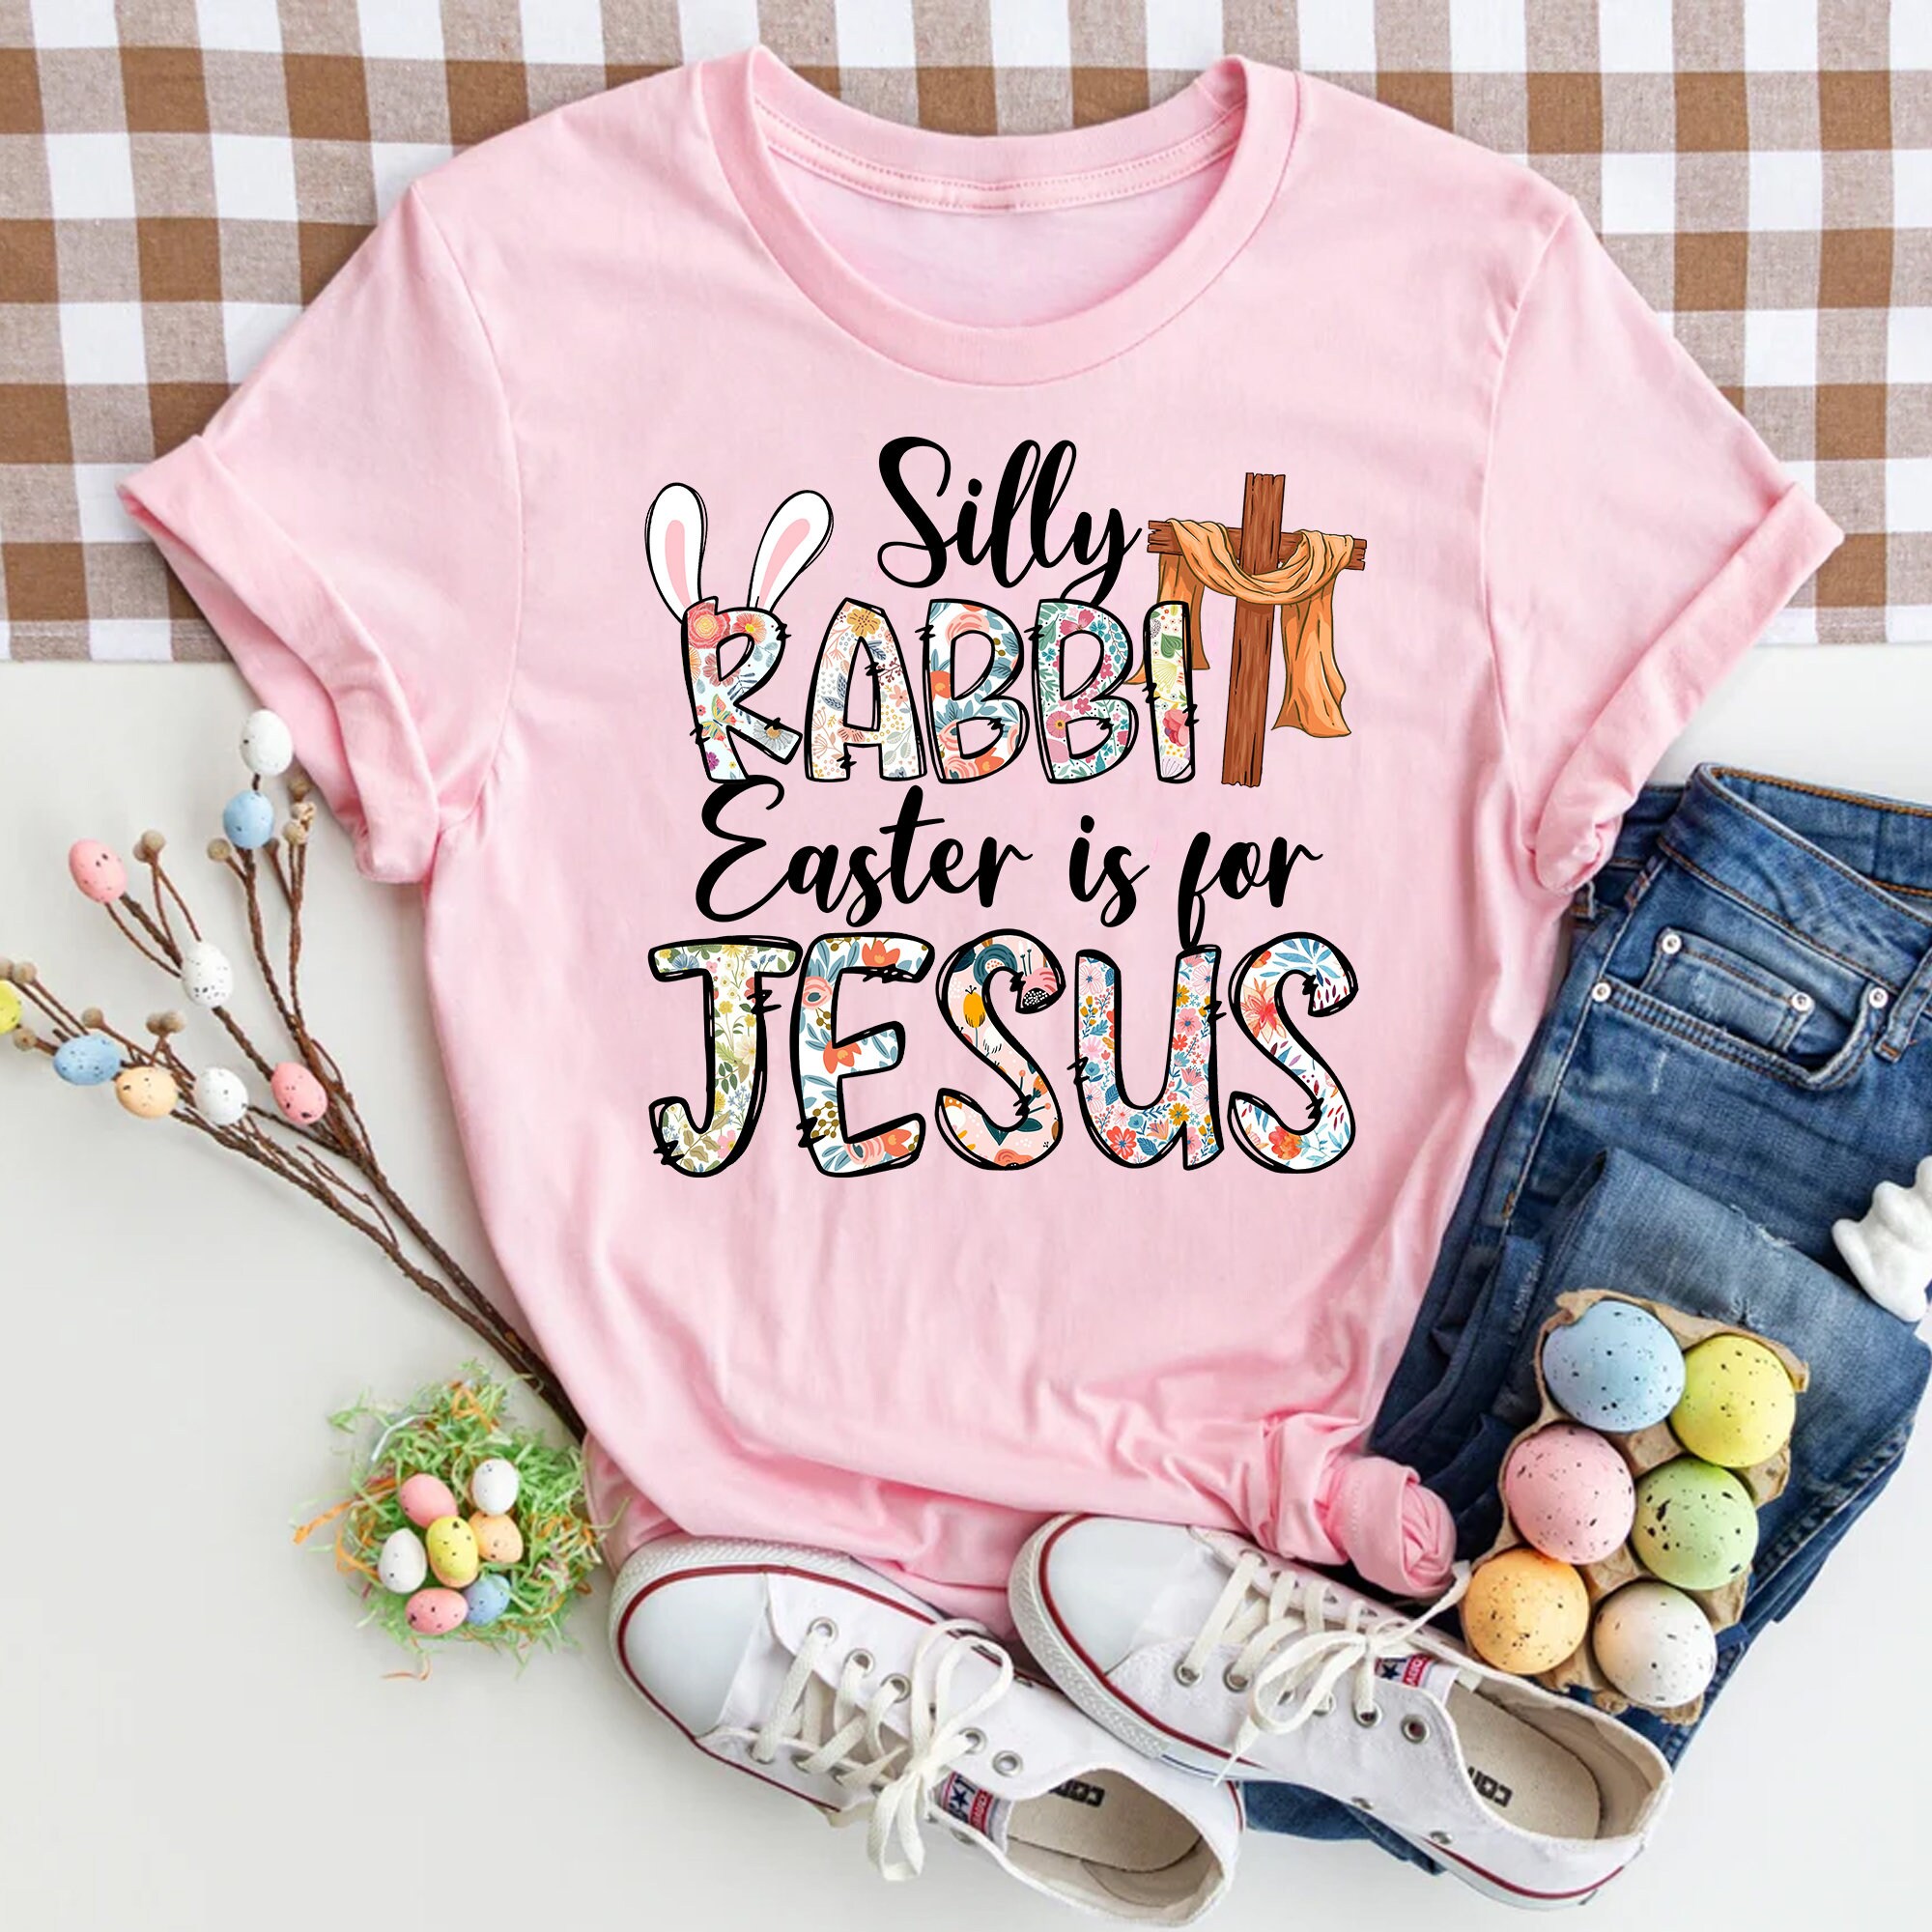 silly rabbit easter is for jesus shirt easter shirts for women 3221 ytw9o